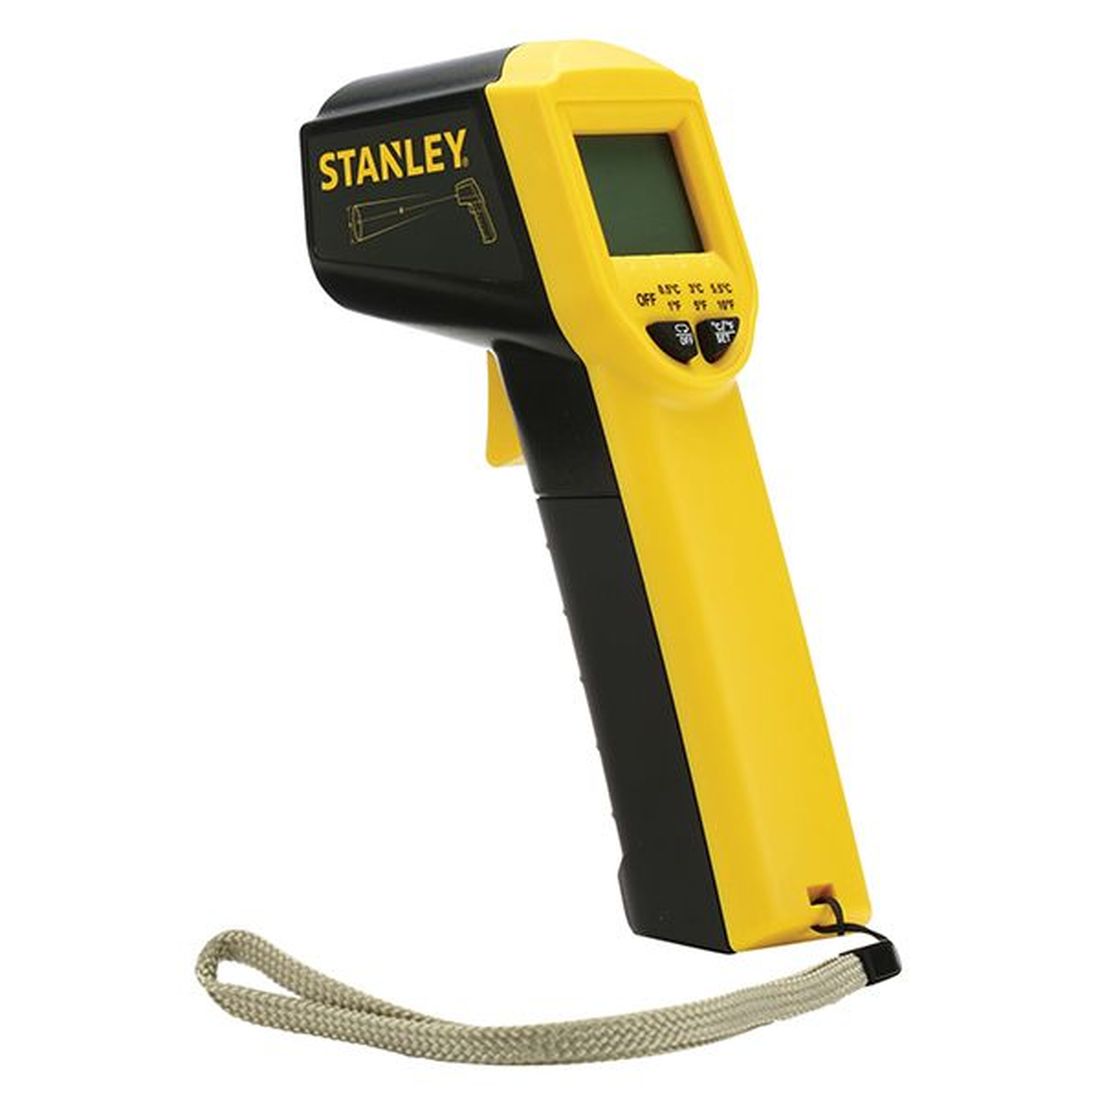 STANLEY Digital Infrared Thermometer      